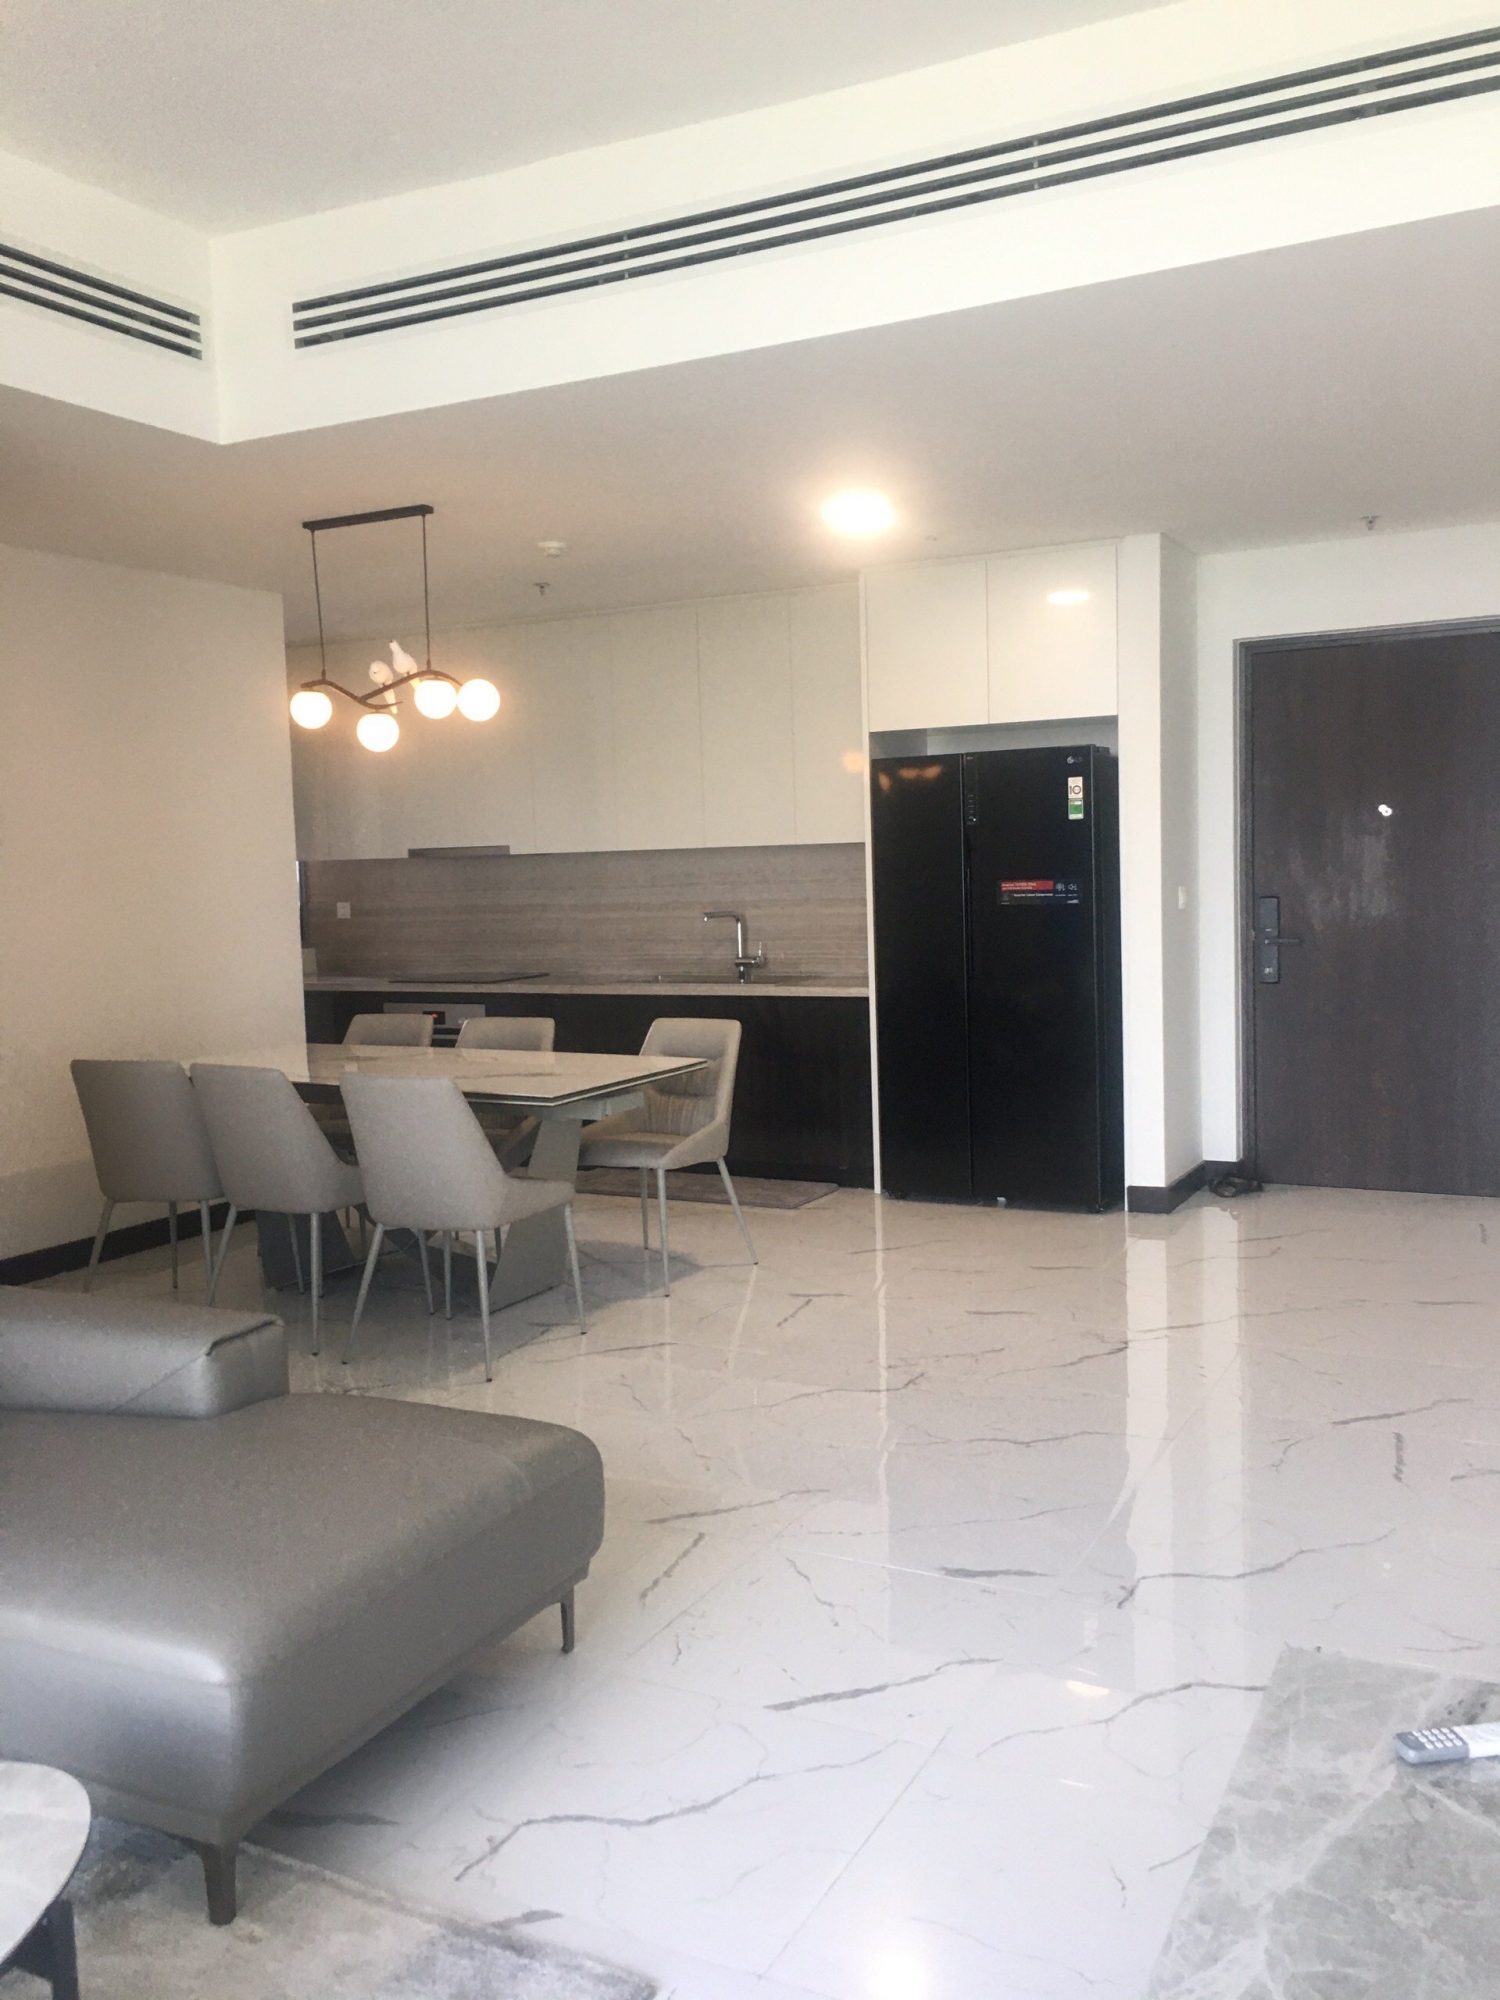 2 bedroom apartment for rent on high floor with full furniture in Empire City